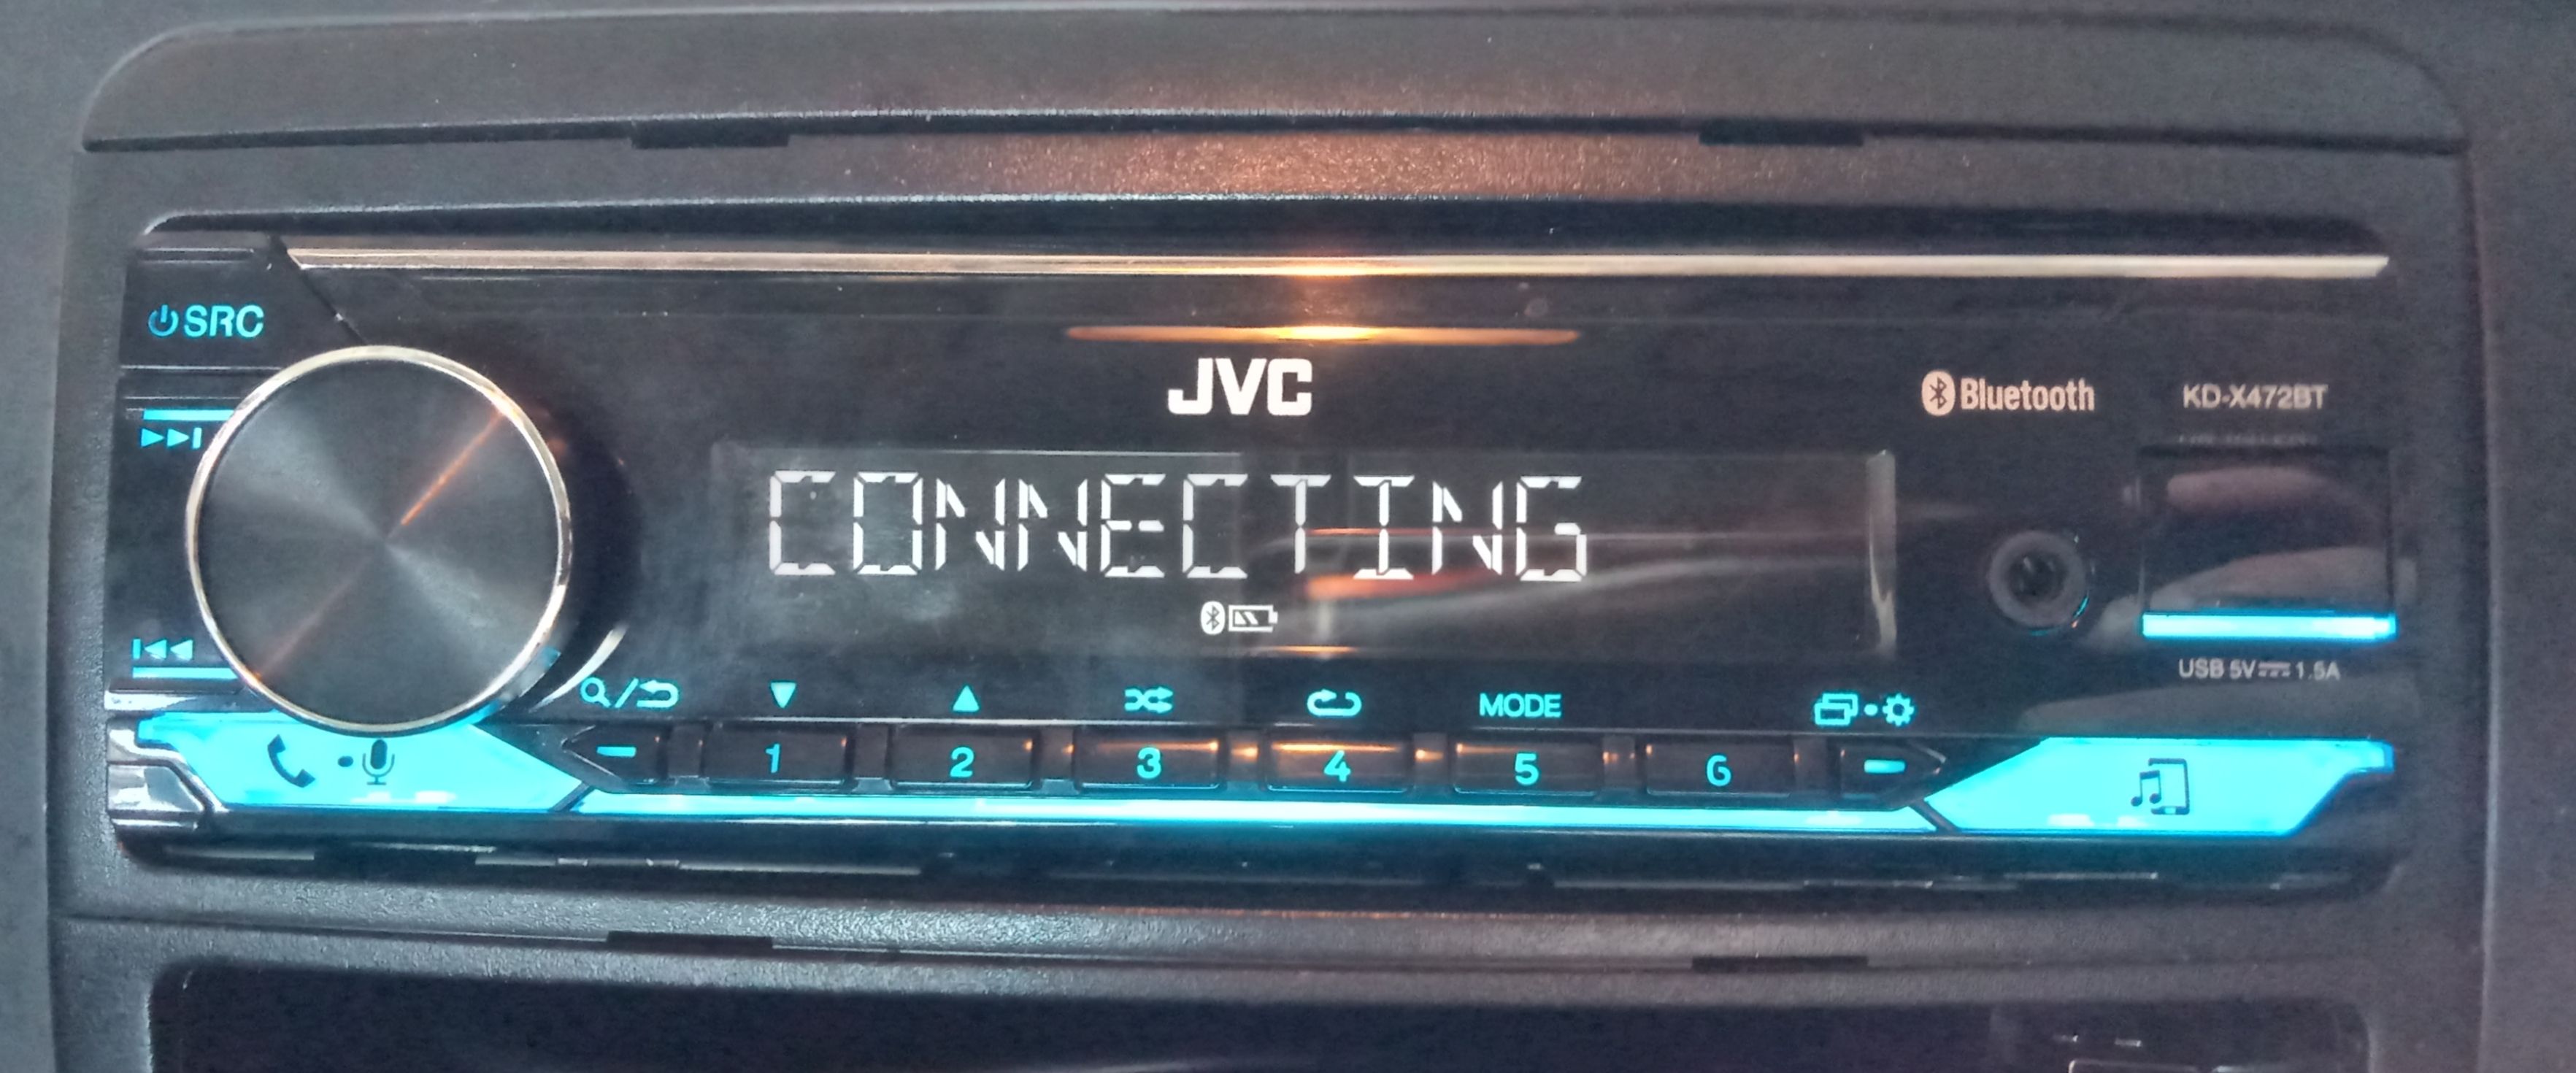 Spotify Connect JVC KD-X472DBT doesnt work Connec - The